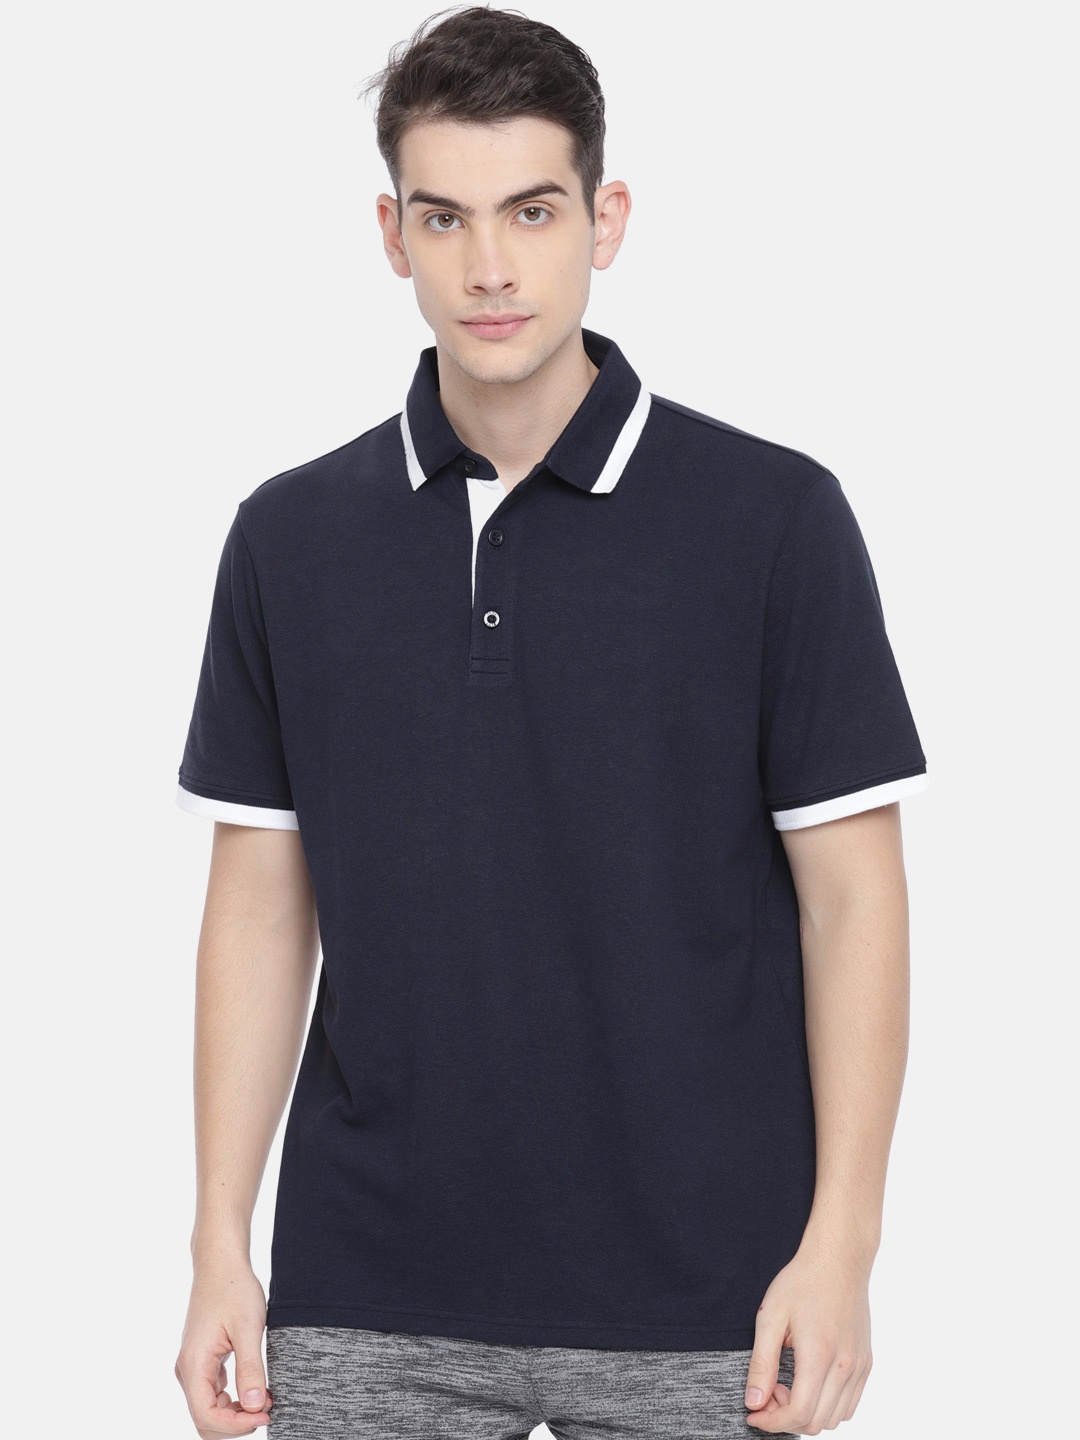 Puma Men Navy Blue Solid ESS Pique Tipping Polo Collar T-Shirt - buy at ...